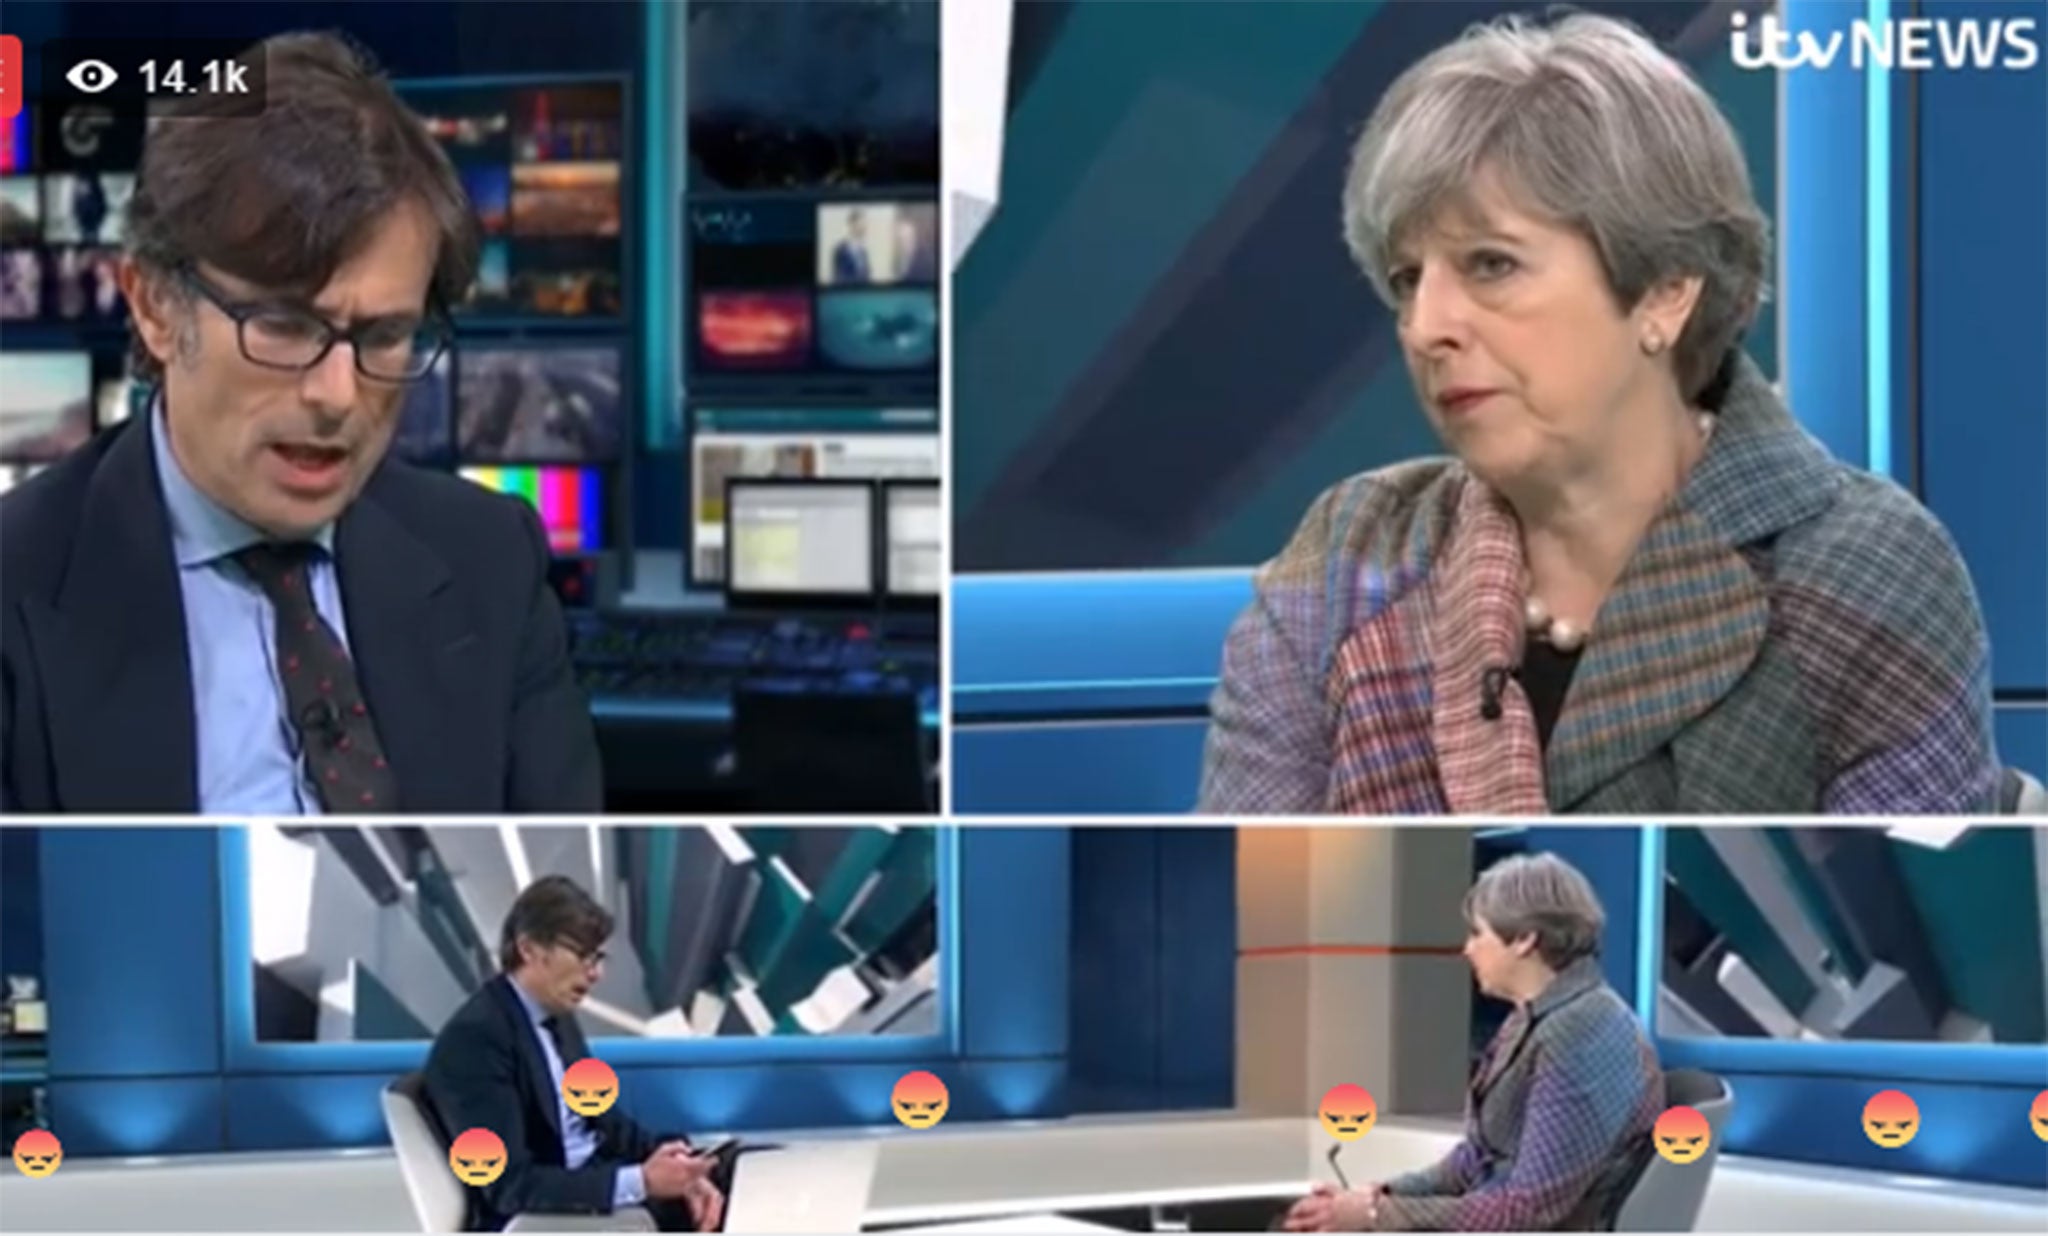 Jeremy Corbyn ambushes Theresa May during Facebook Live event with TV debate challenge